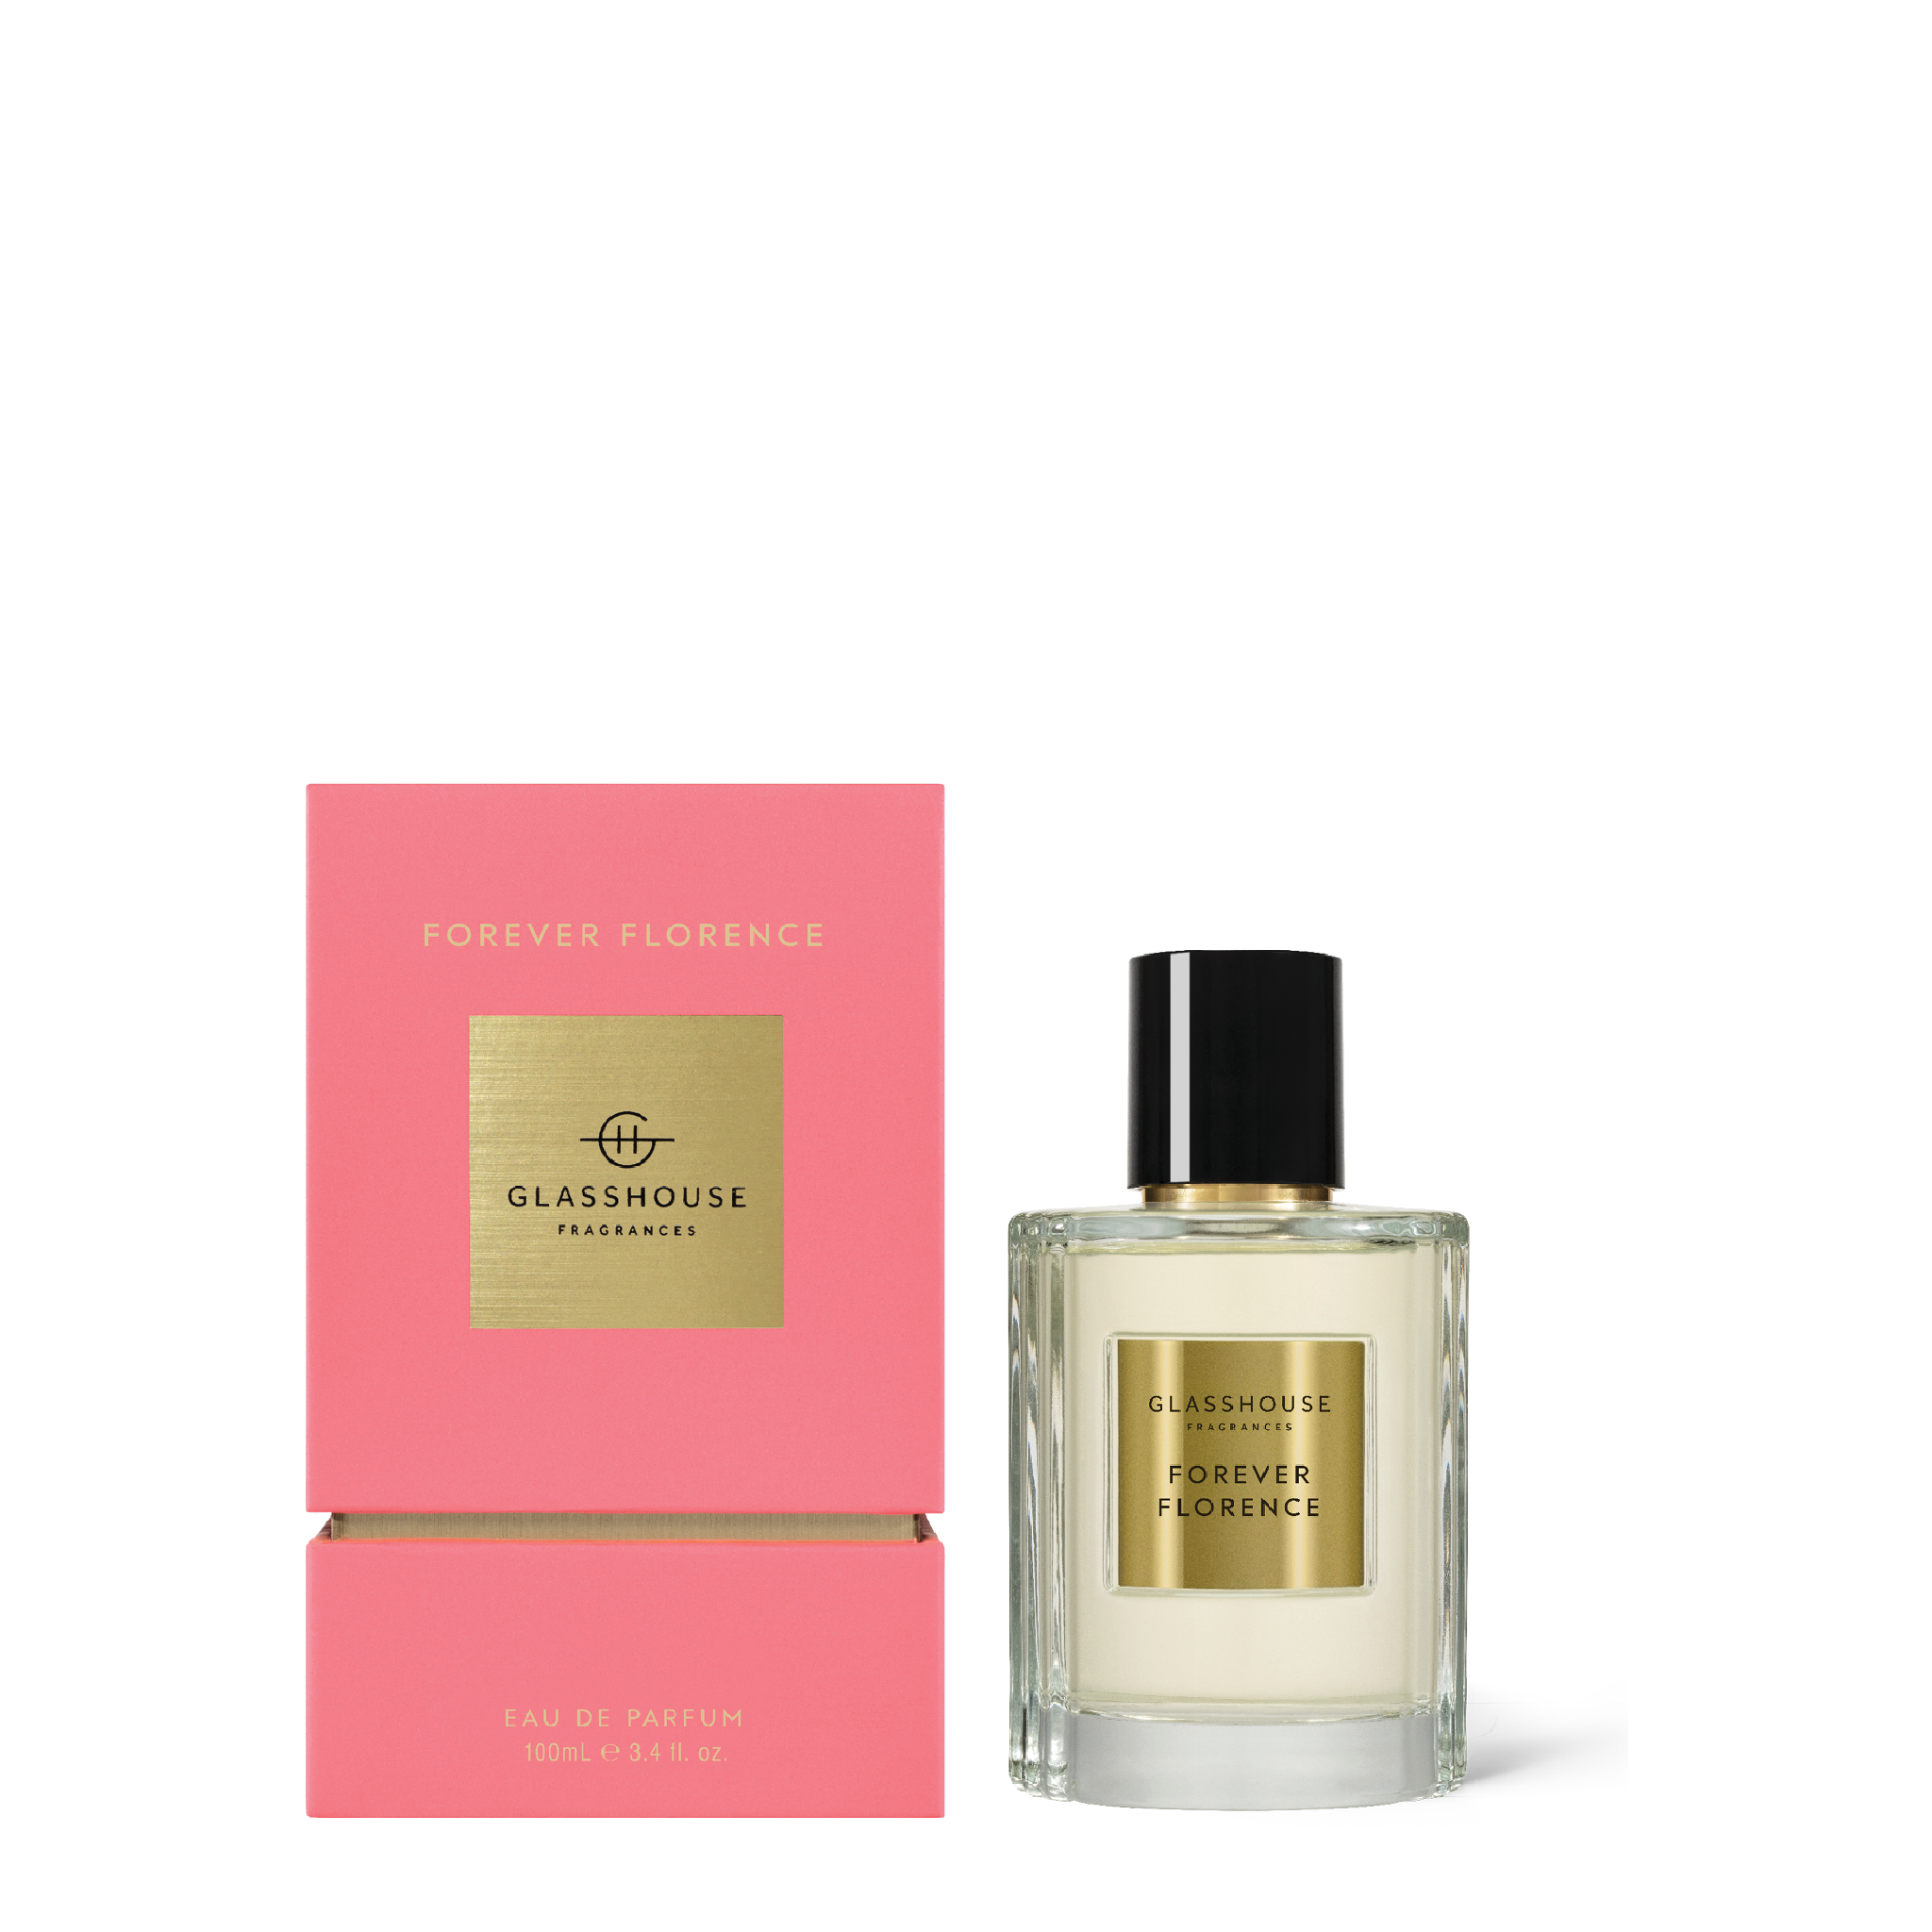 Glasshouse Fragrances Forever Florence Wild Peonies and Lily 100mL Eau de Parfum Spray with box